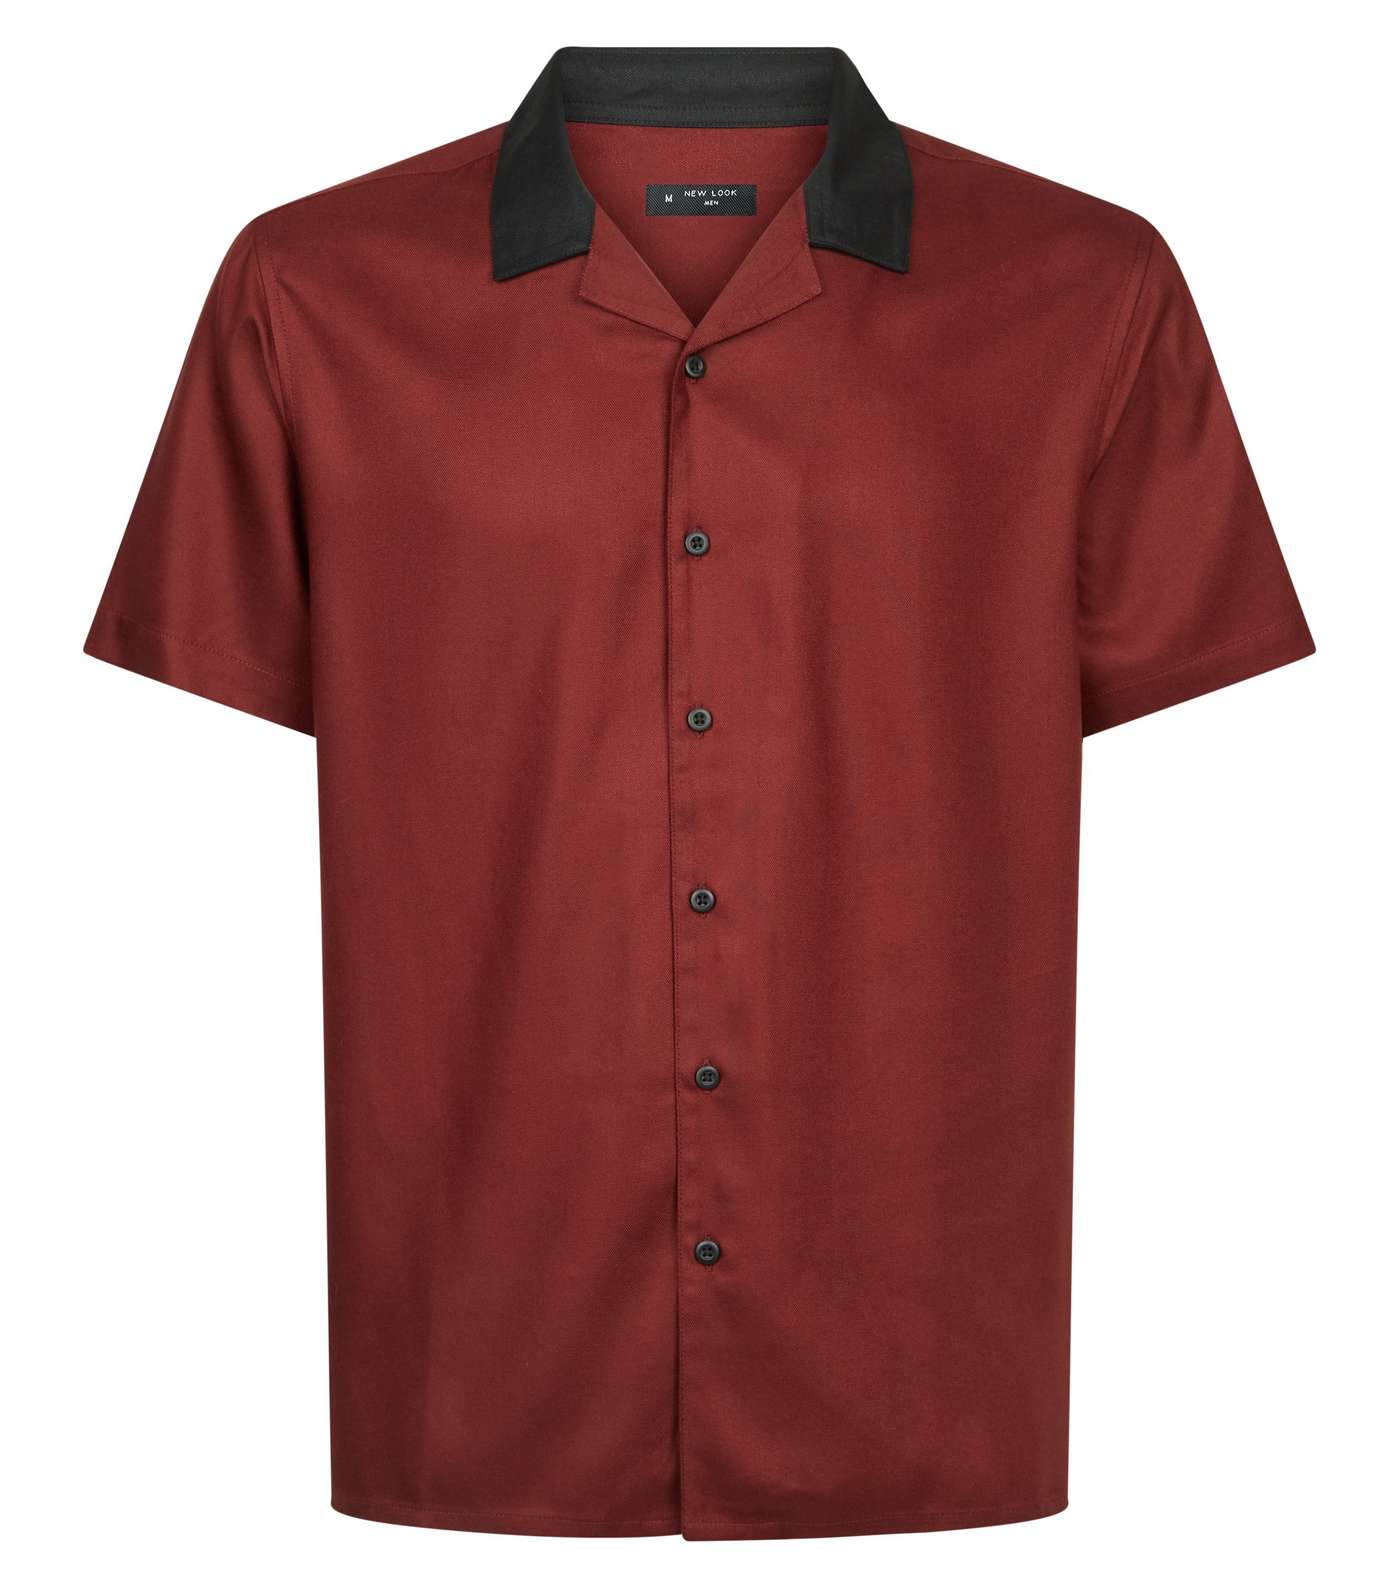 Burgundy Contrast Collared Shirt Image 4